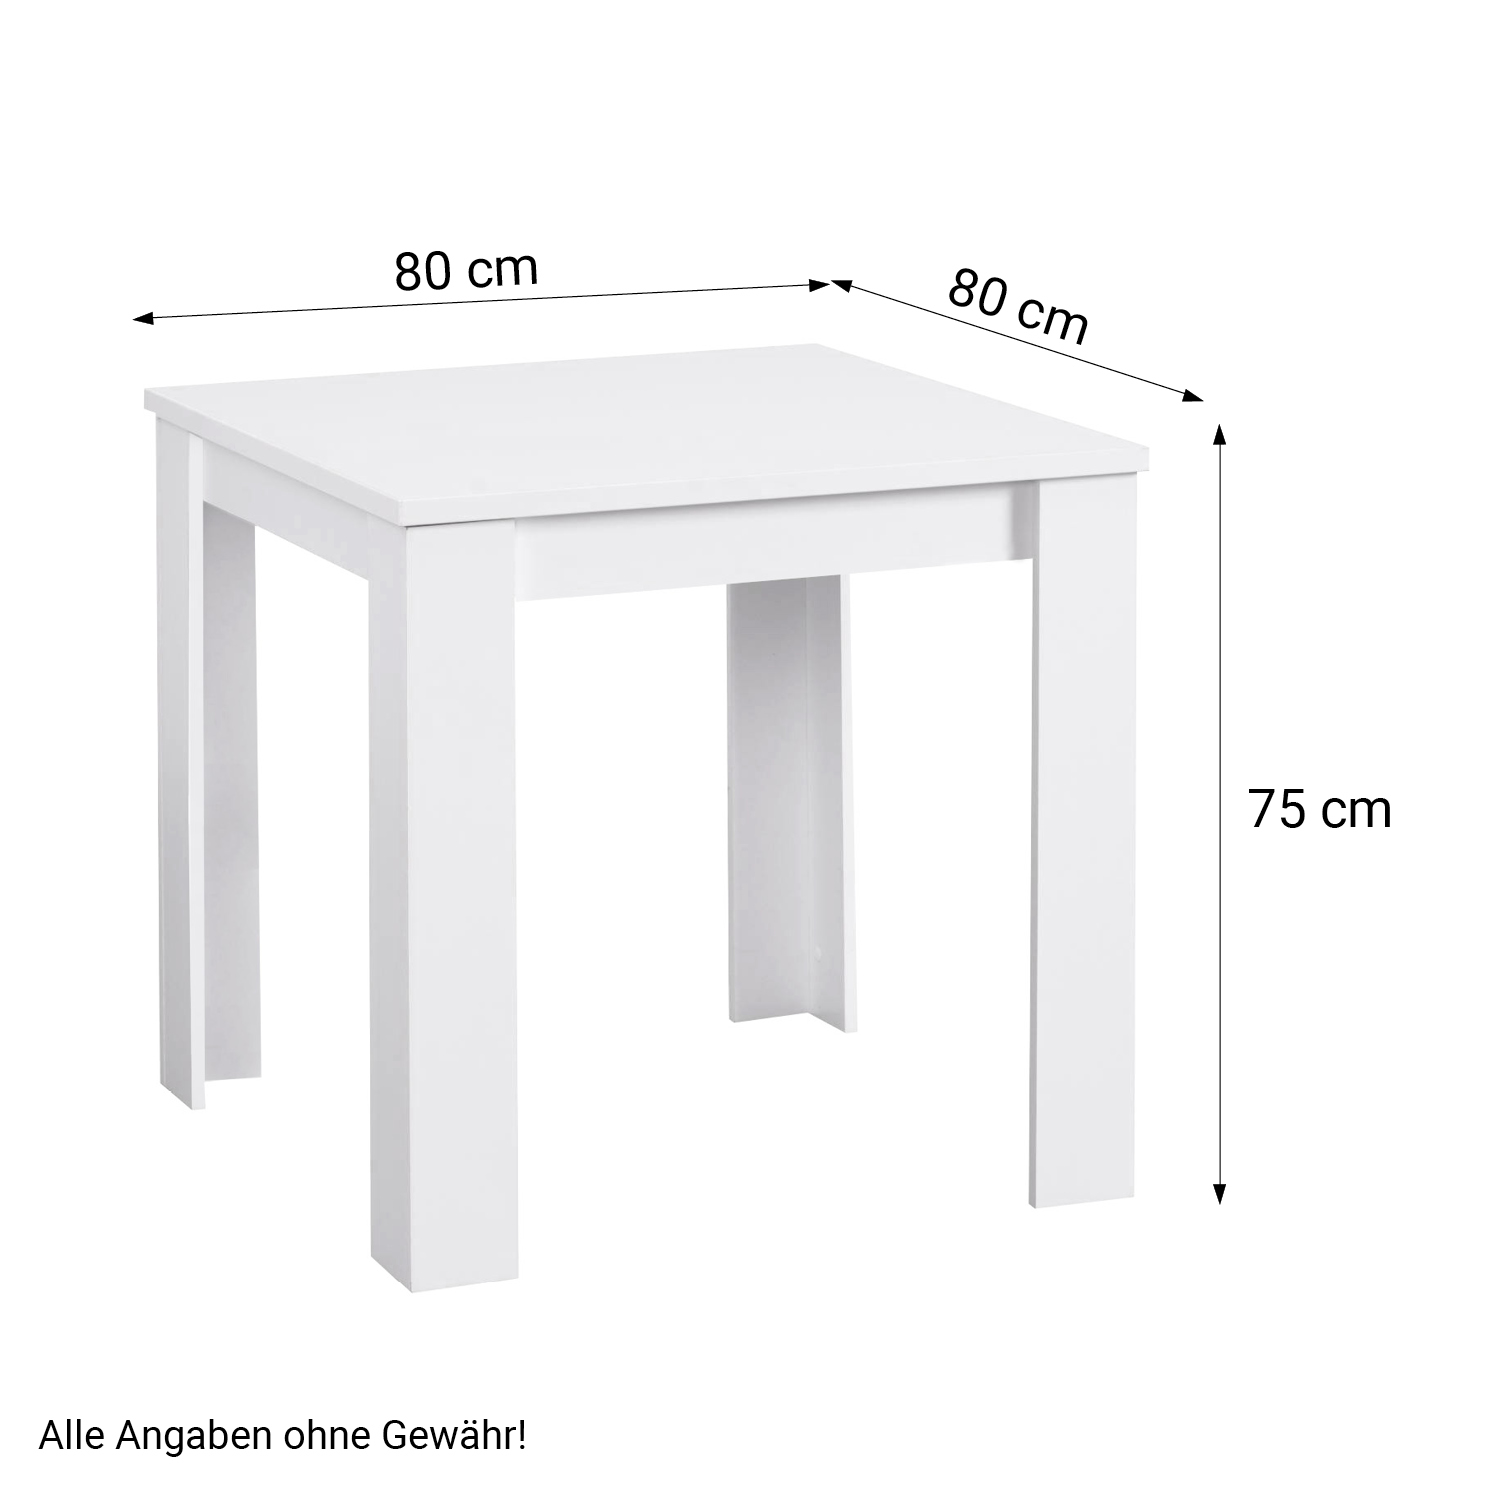 Modern Dining Table White 80x80 cm with 2 Chairs Linen Anthracite Dining Room Table Wooden Table